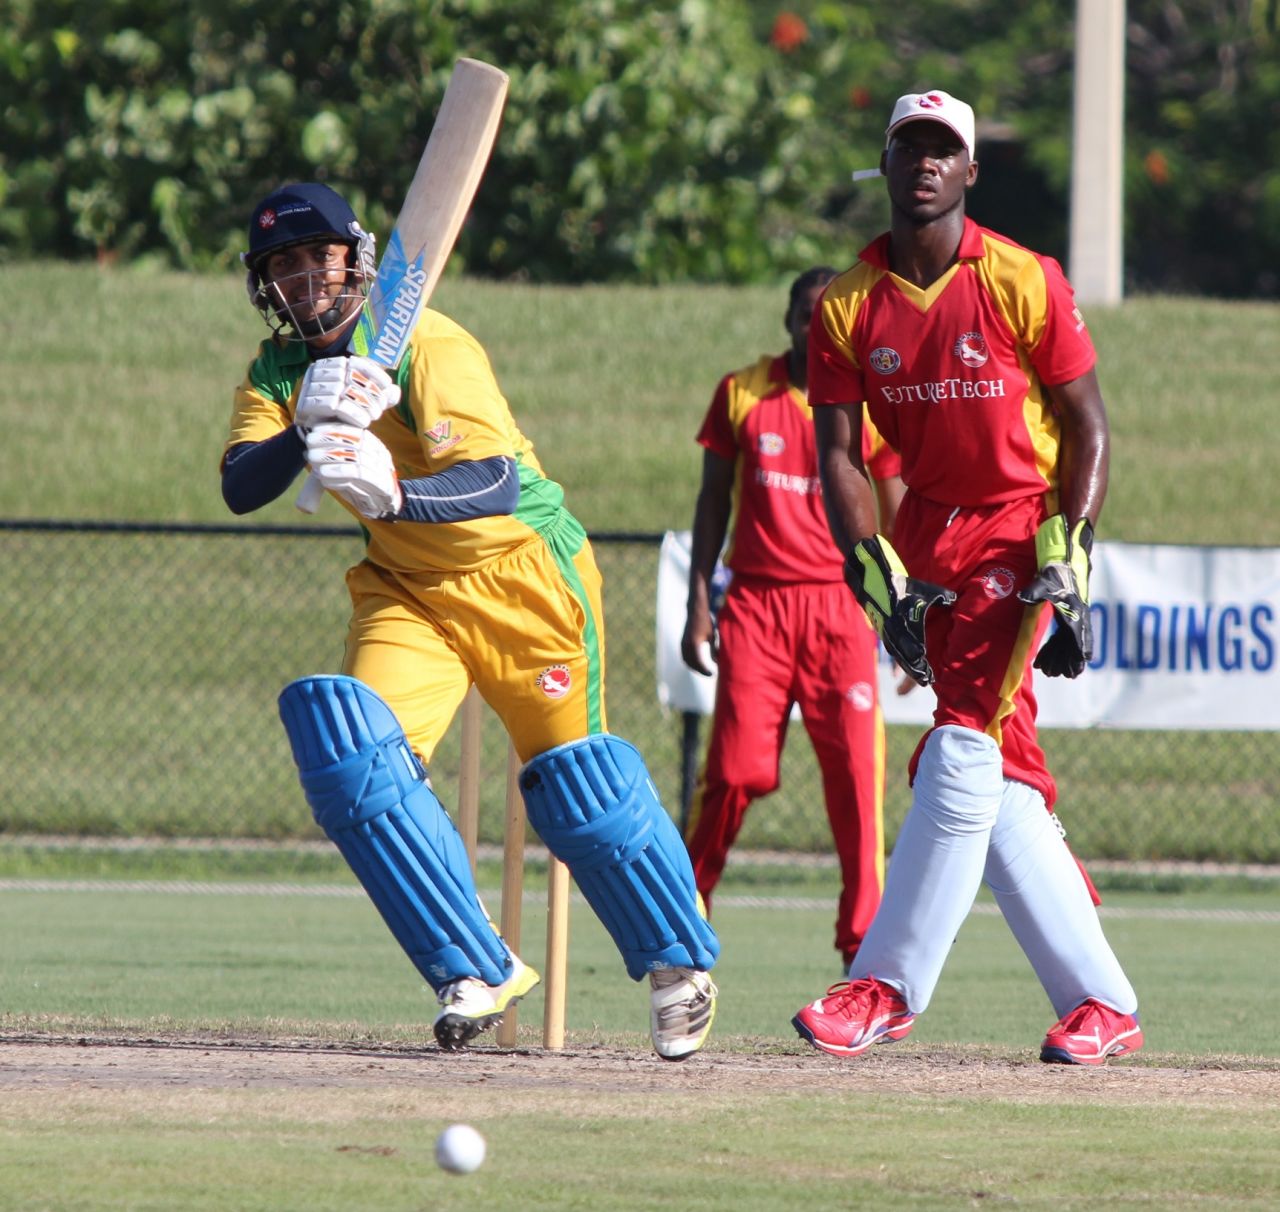 Ravi Timbawala flicks through midwicket, New York v South West, USACA T20 National Championship, Lauderhill, August 16, 2014